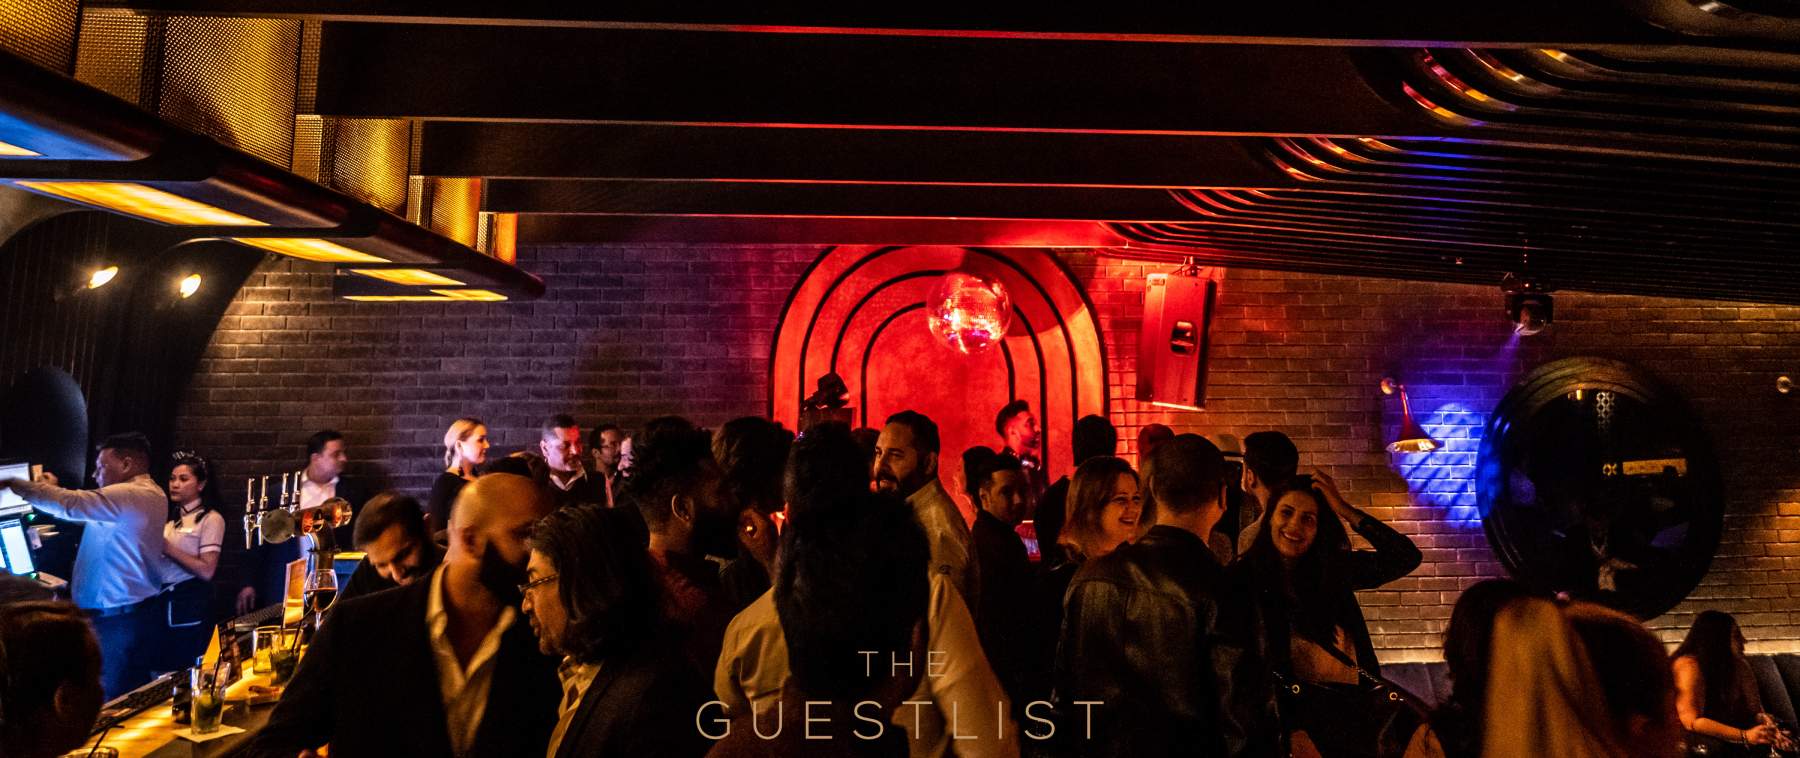 The Guestlist Event